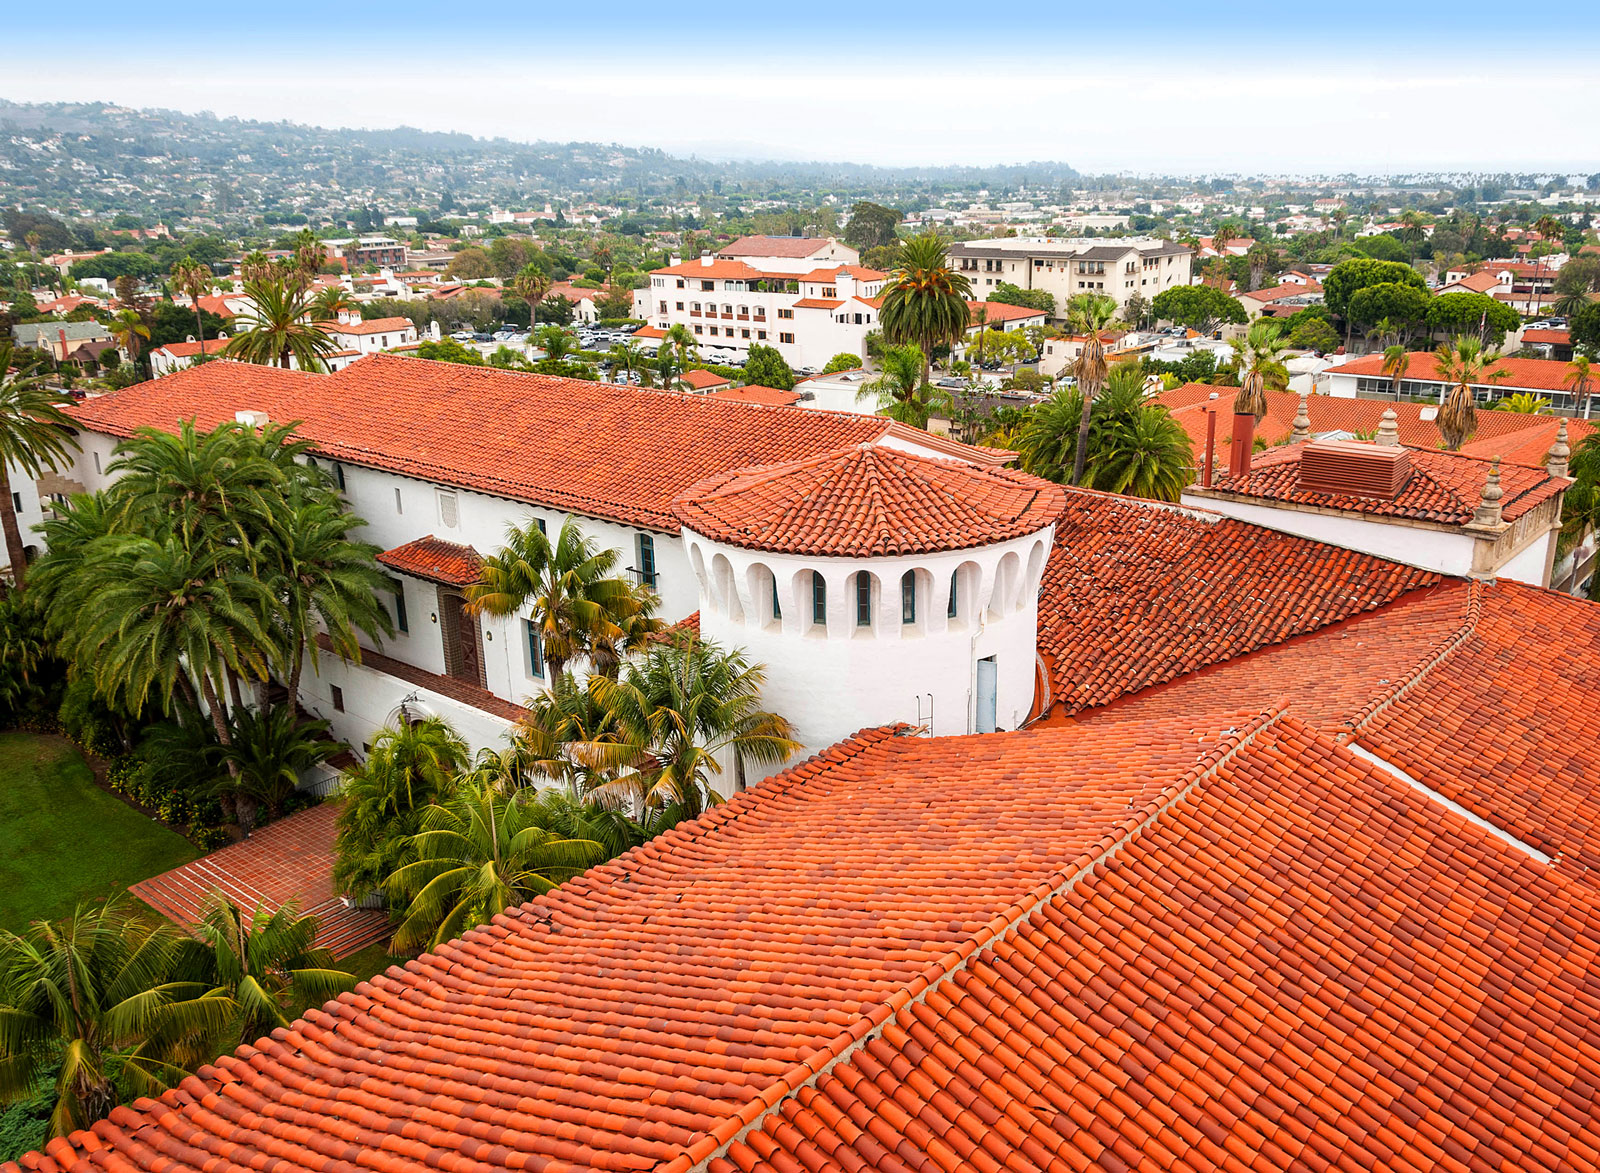 View from the clock tower of the Santa Barbara County Courthouse